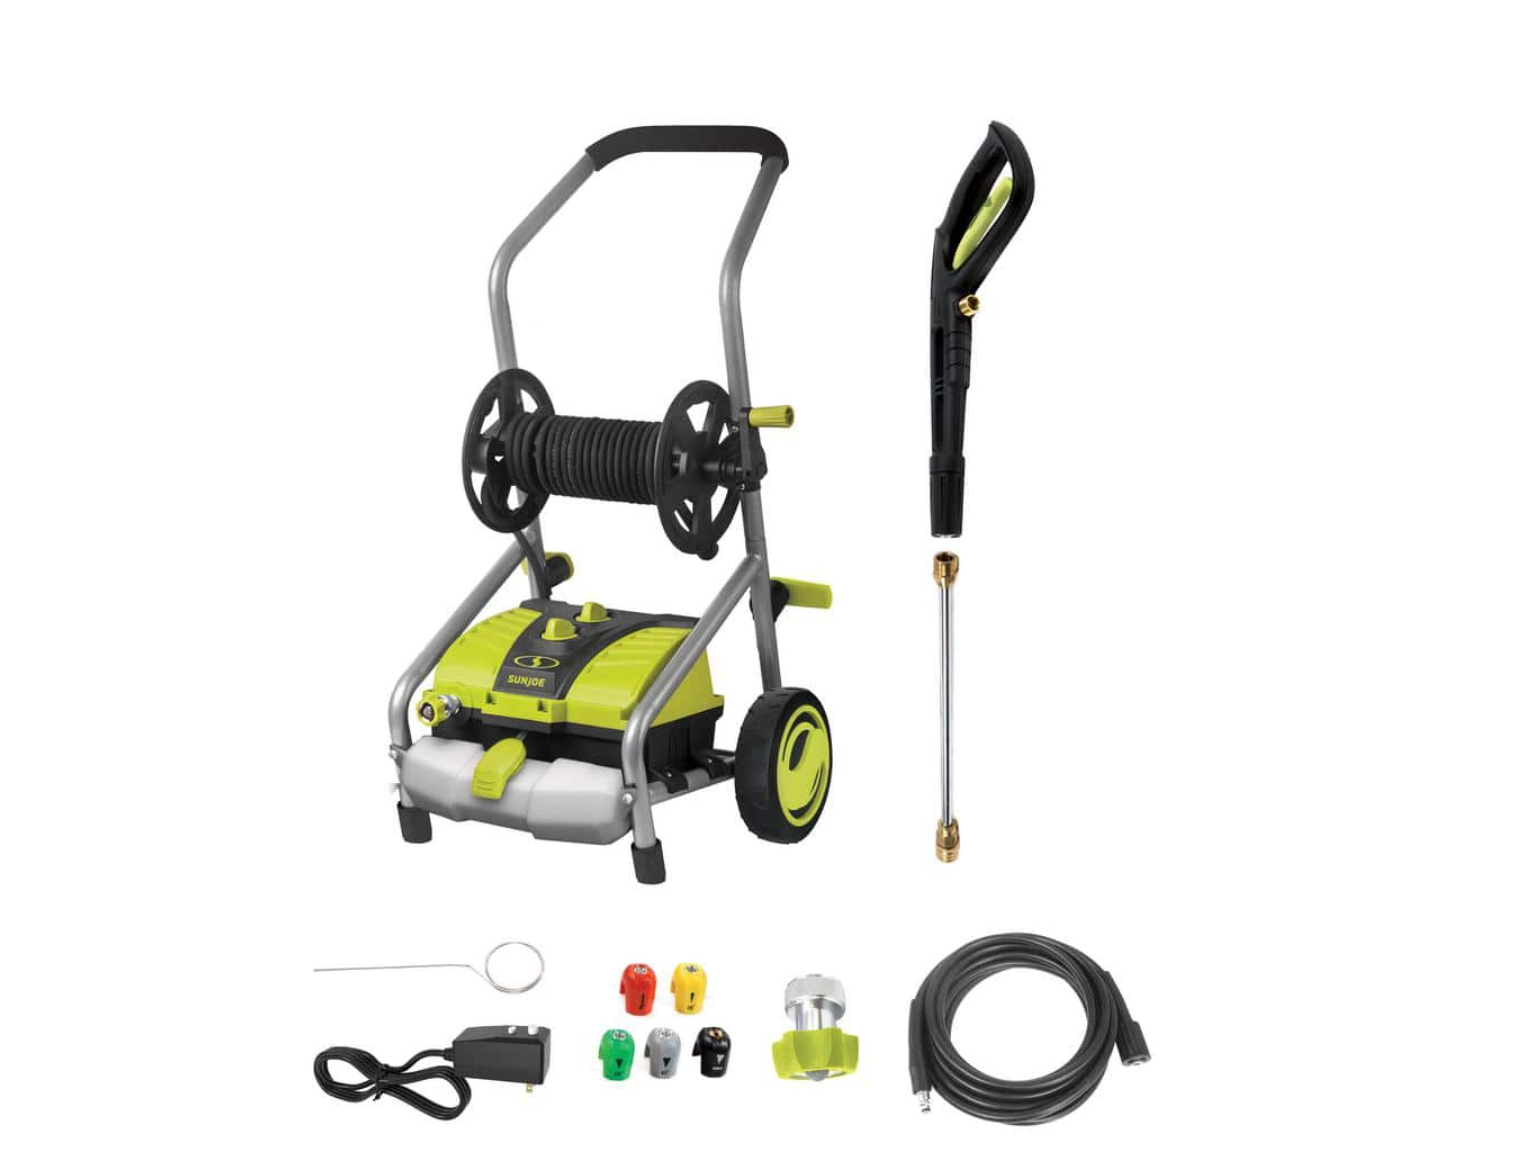 https://bigbigmart.com/wp-content/uploads/2022/04/Sun-Joe-SPX4001-2030-PSI-1.76-GPM-14.5-Amp-Electric-Pressure-Washer-with-Pressure-Select-Technology-and-Hose-Reel.png